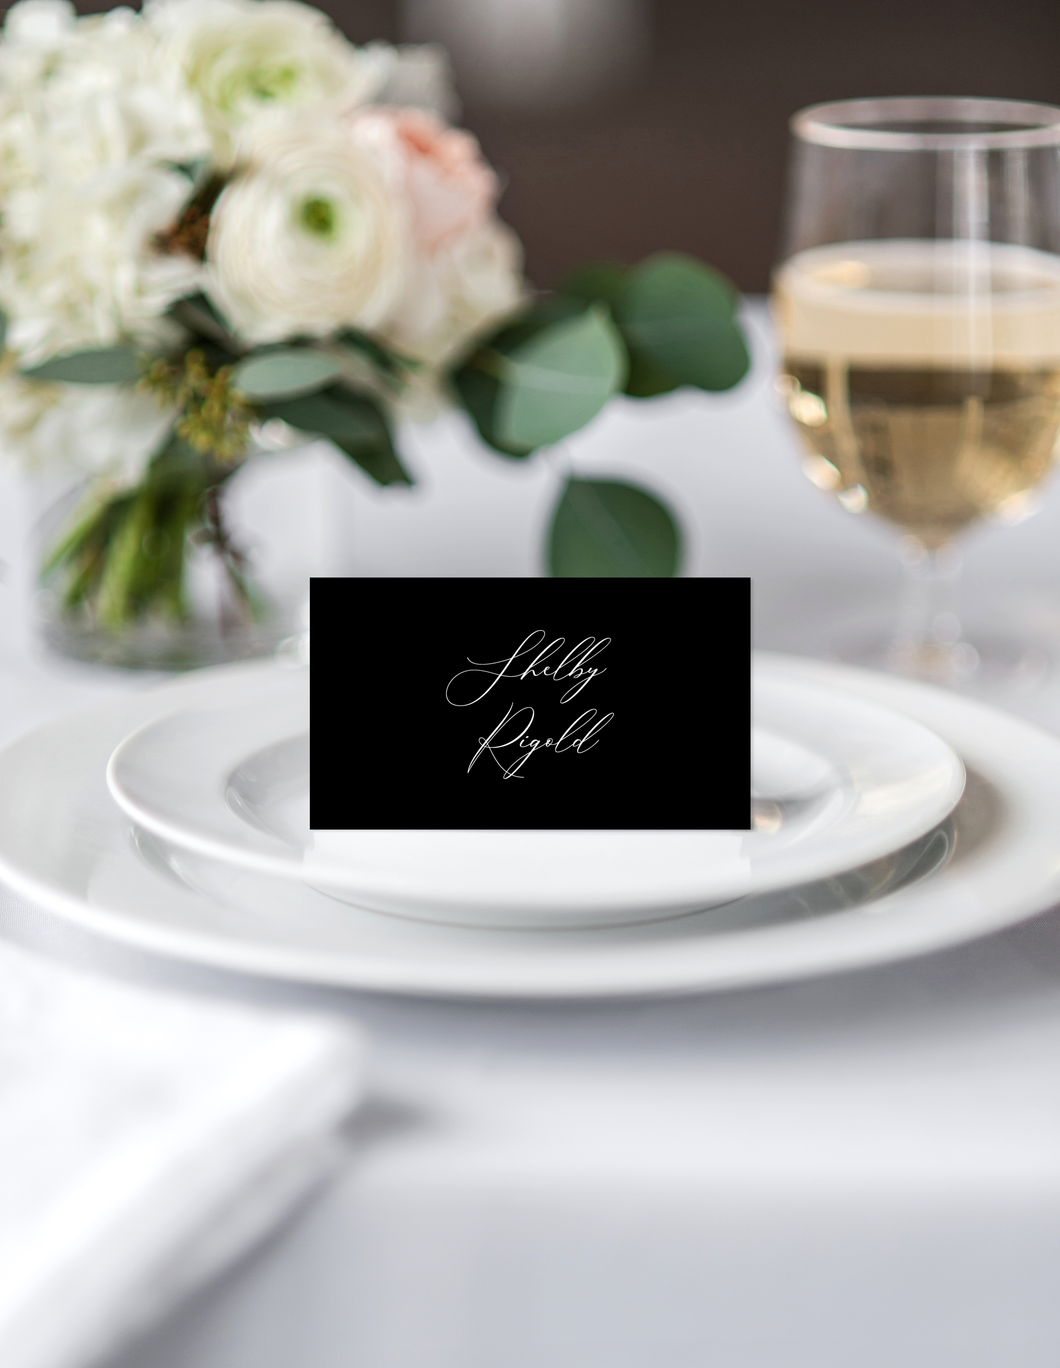 Romantic Black and White Wedding Place Cards